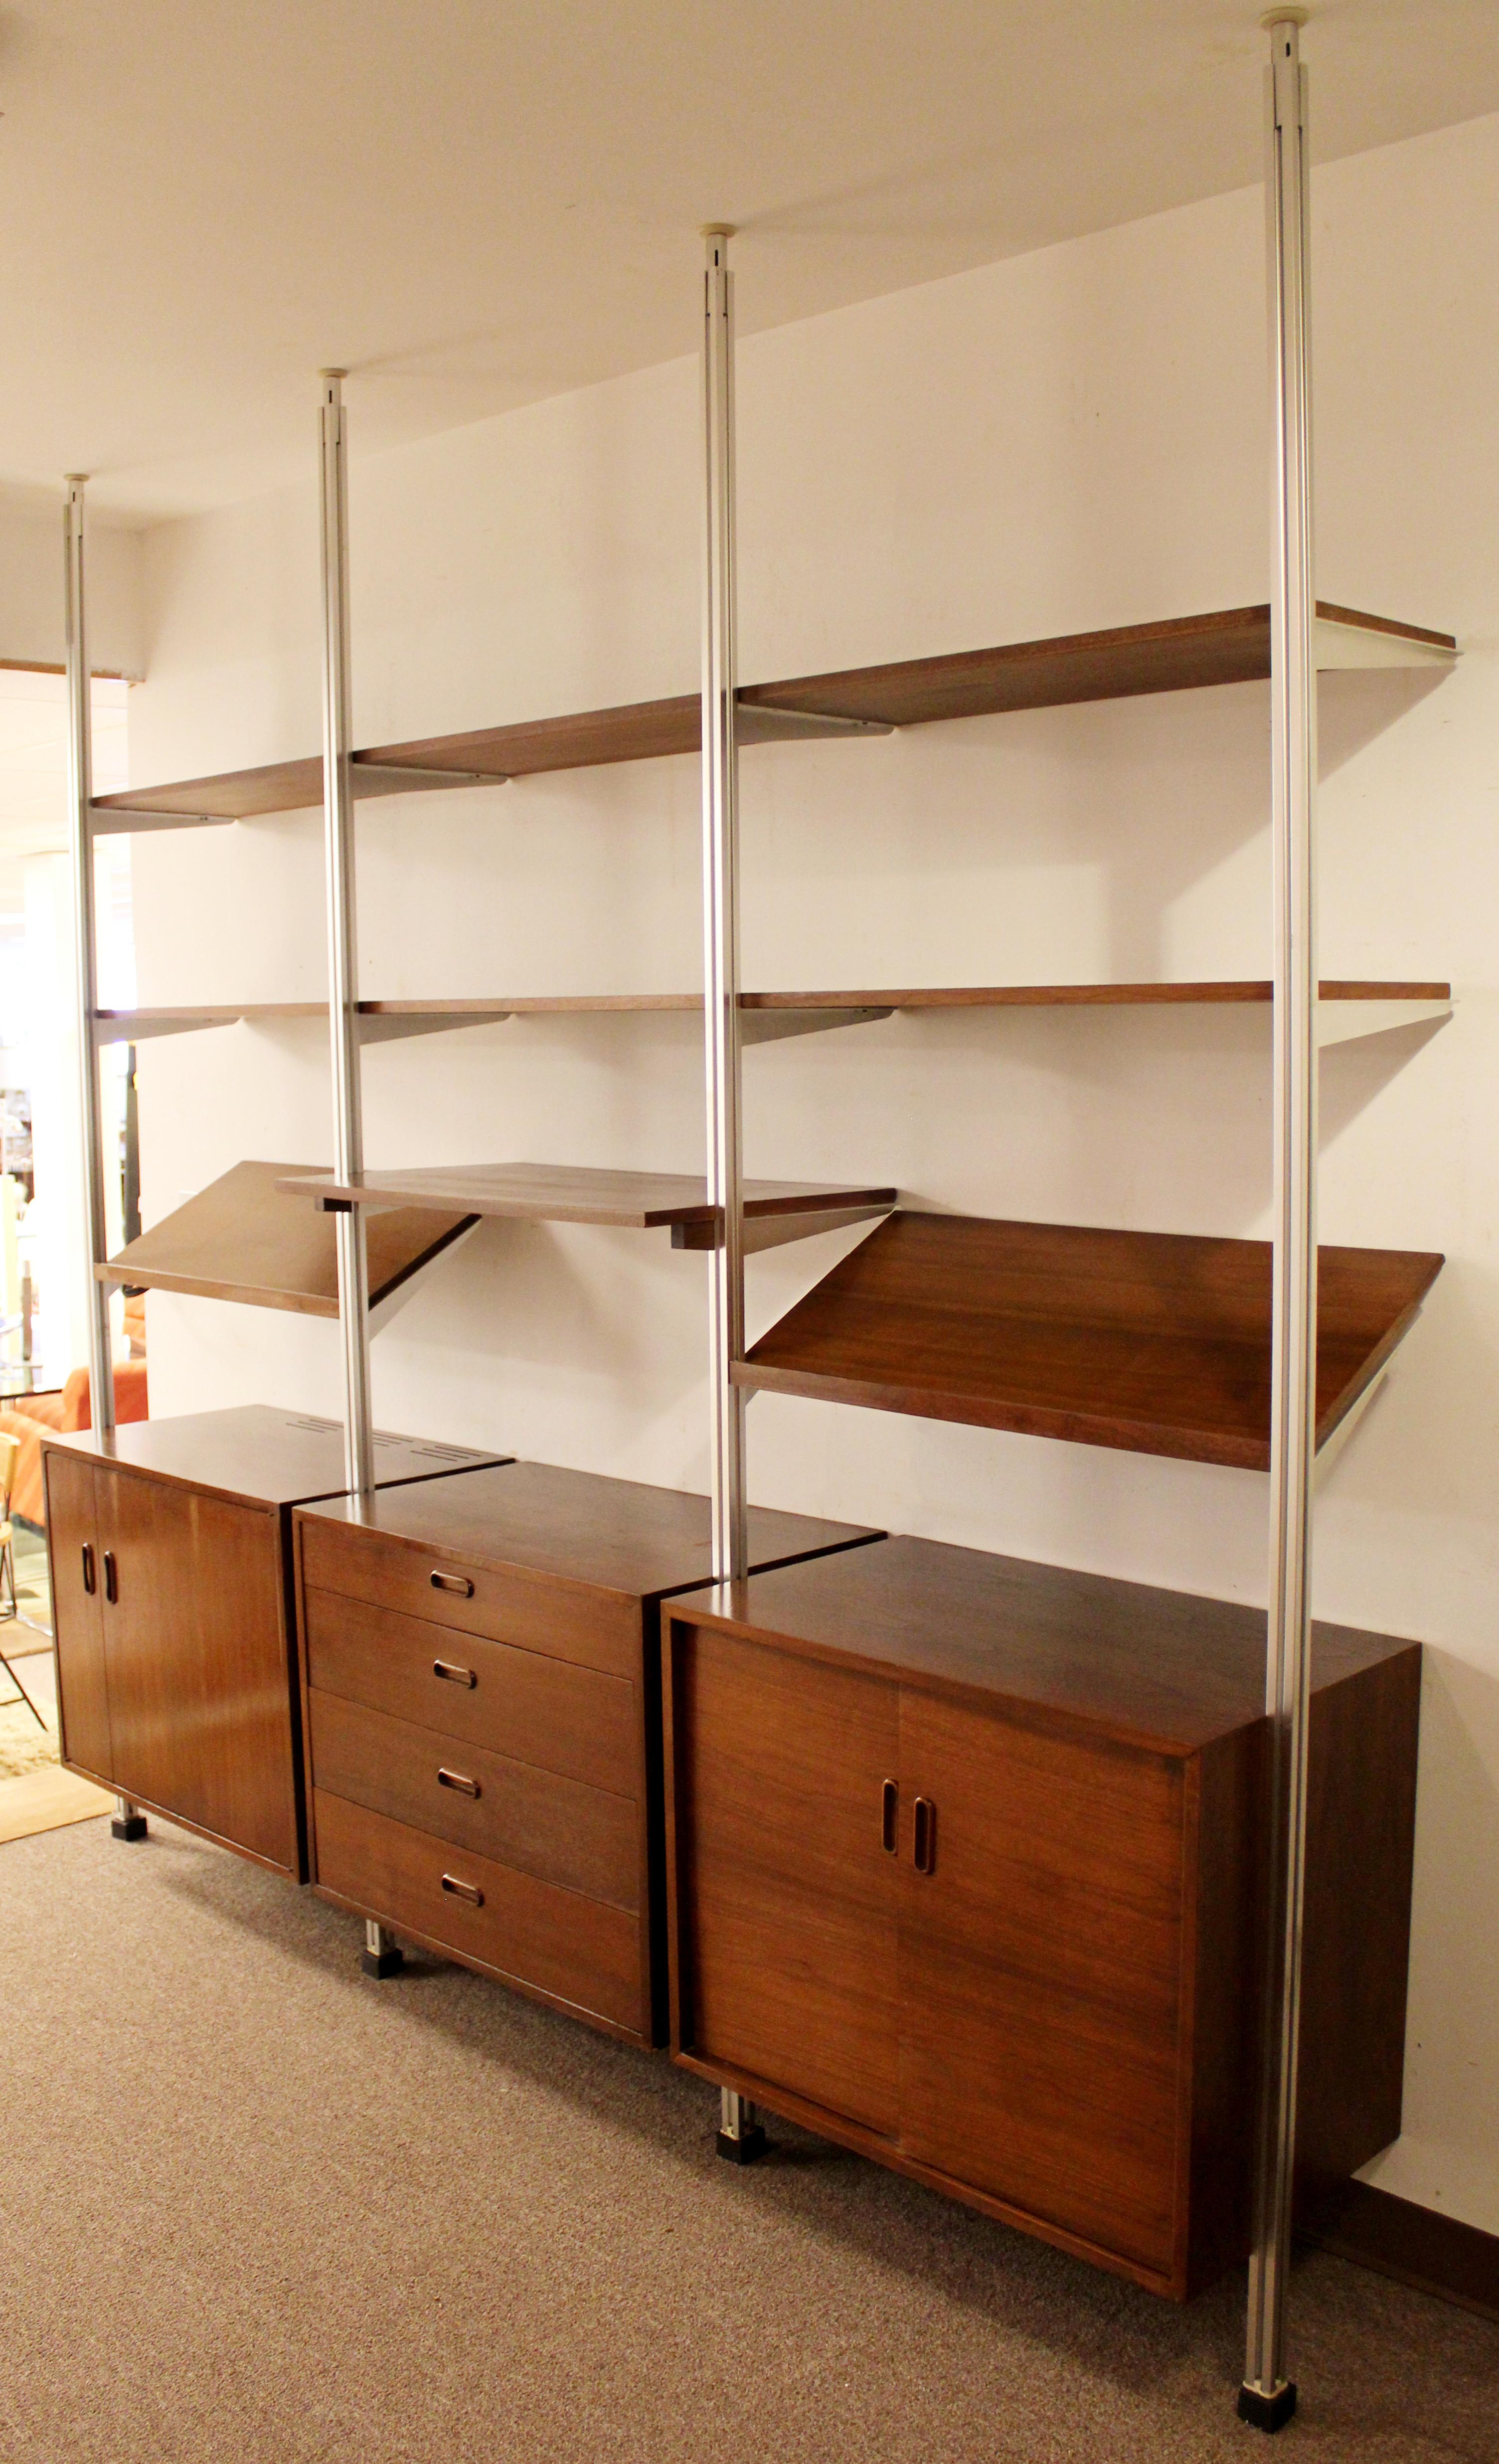 george nelson wall unit